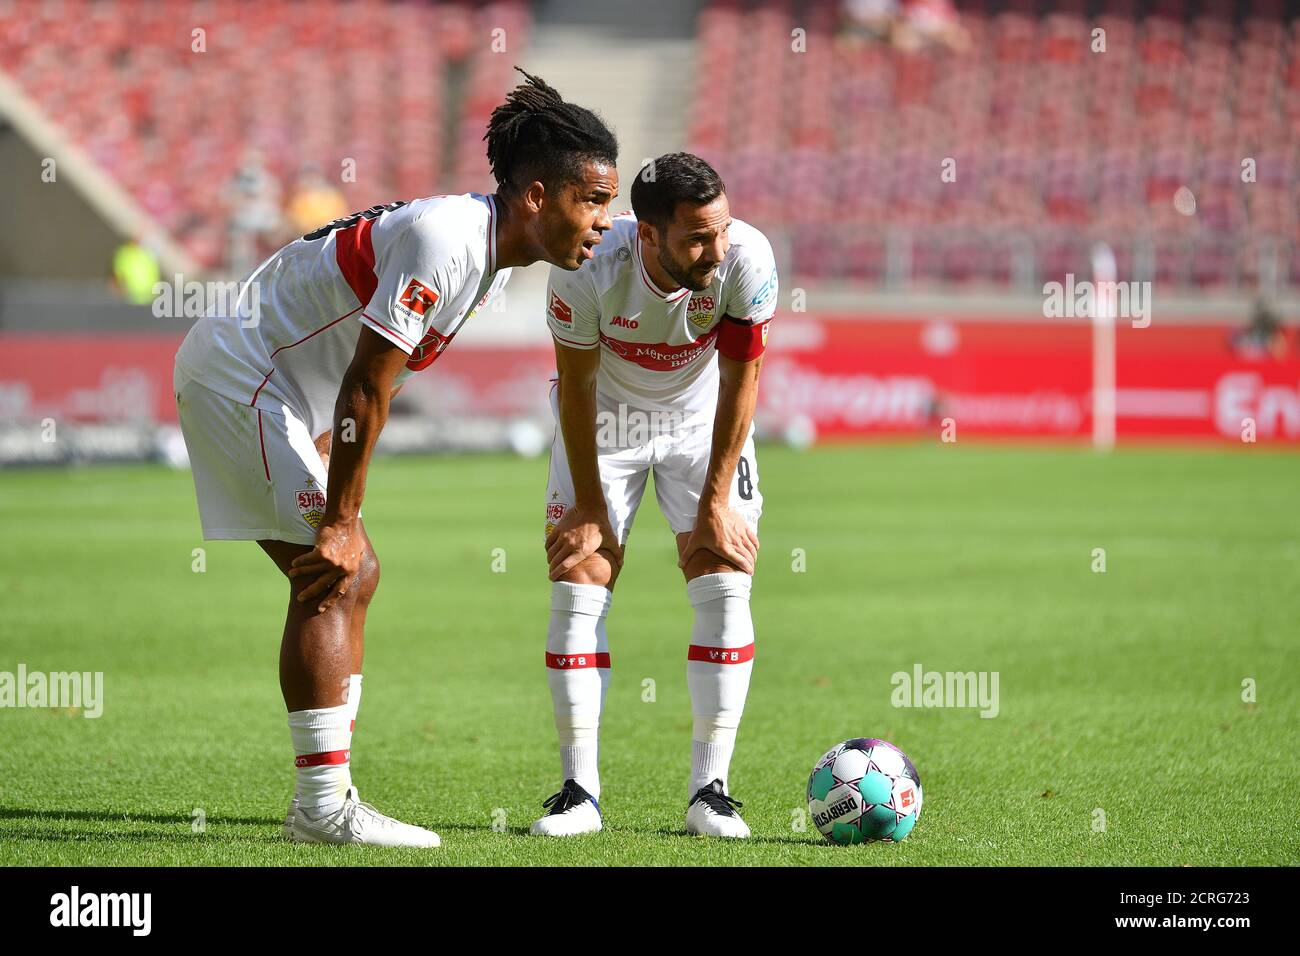 From right: Gonzalo CASTRO (VFB Stuttgart), Daniel DIDAVI (VFB Stuttgart) before taking a free kick, action. Soccer 1. Bundesliga season 2020/2021, 1 matchday, matchday01, VFB Stuttgart (S) - SC Freiburg (FR) 2-3, on September 19, 2020 in Munich MERCEDES BENZ ARENA, DFL REGULATIONS PROHIBIT ANY USE OF PHOTOGRAPHS AS IMAGE SEQUENCES AND/OR QUASI-VIDEO.EDITORIAL USE ONLY. | usage worldwide Stock Photo